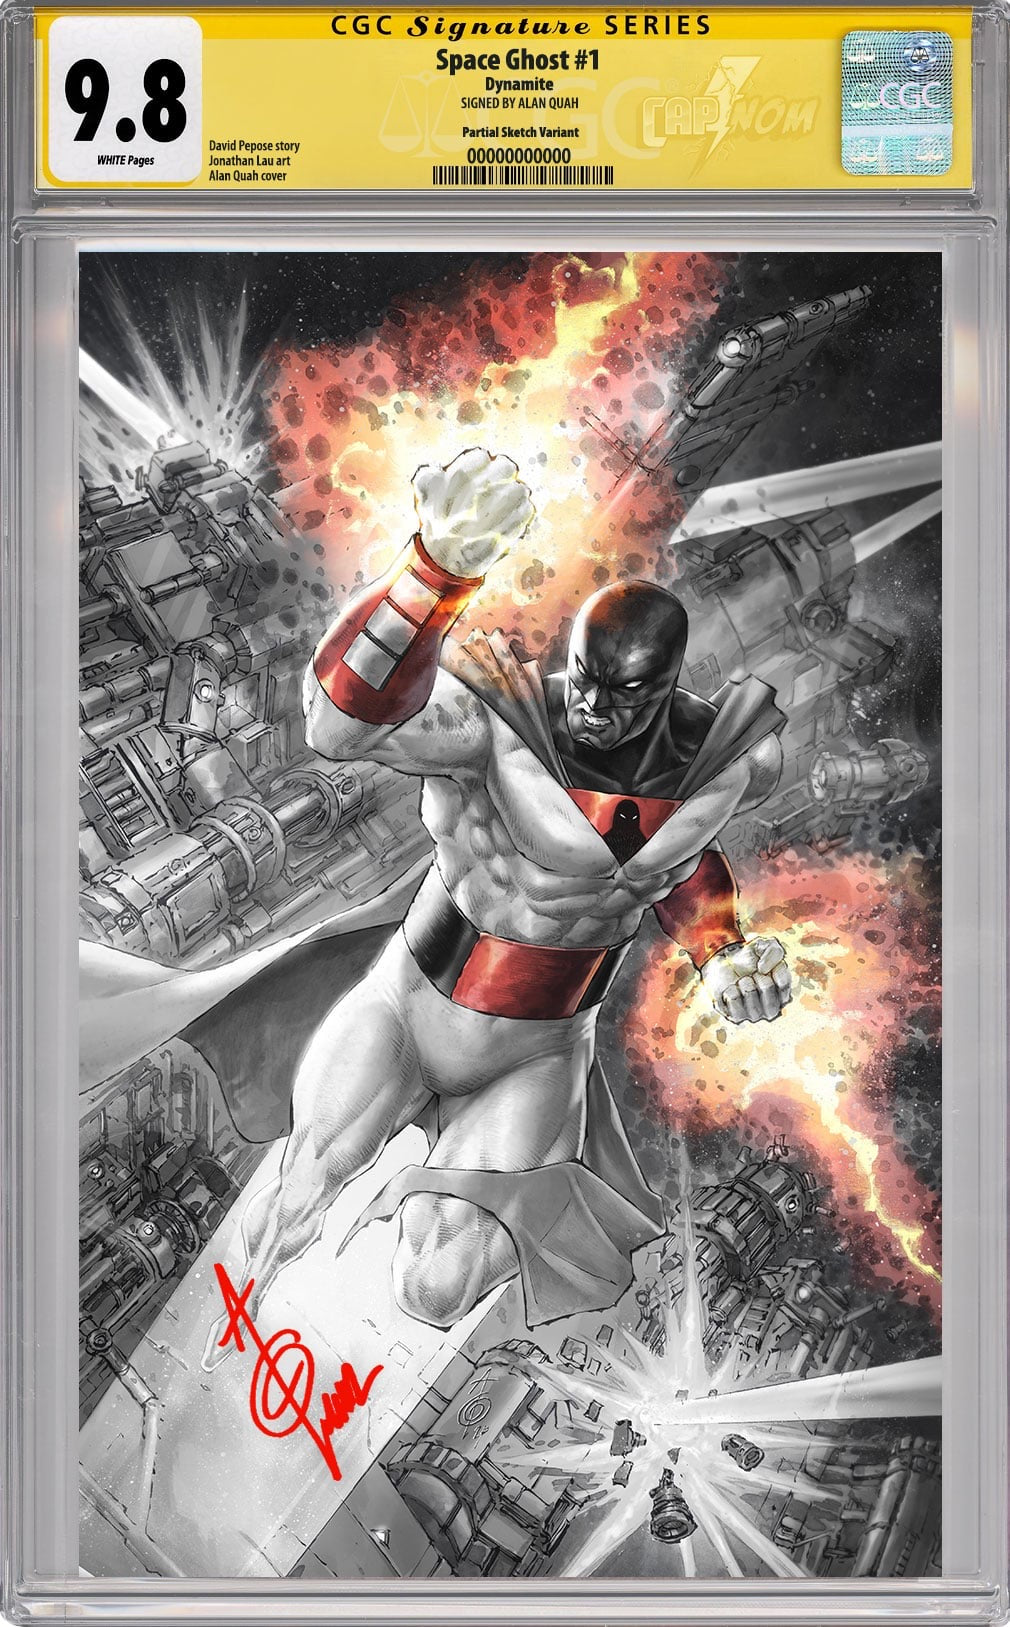 Space Ghost #1 Lake Como Exclusive Full Virgin Wraparound CGC SS 9.8 Signed by Alan Quah